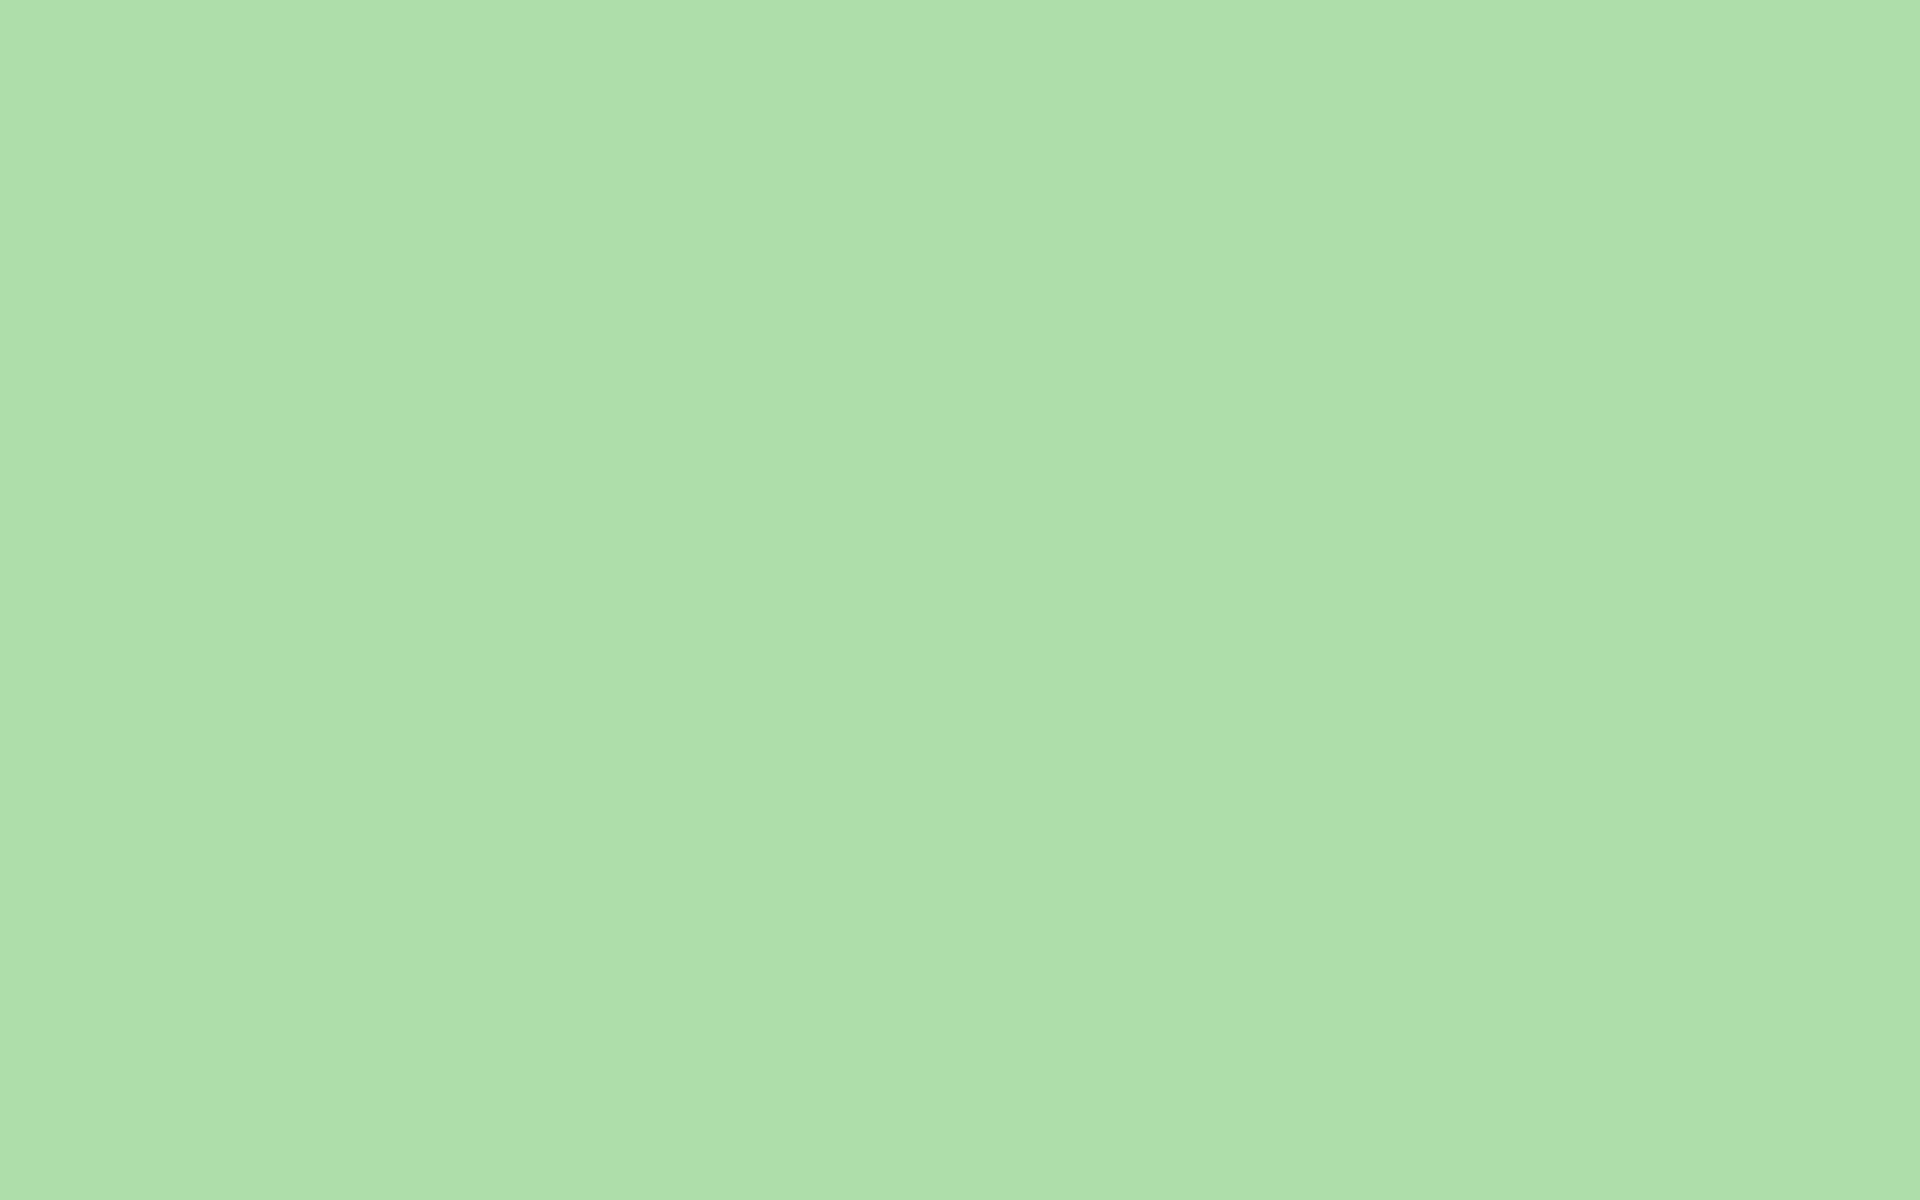 Solid Light Green HD Wallpaper, Background Image